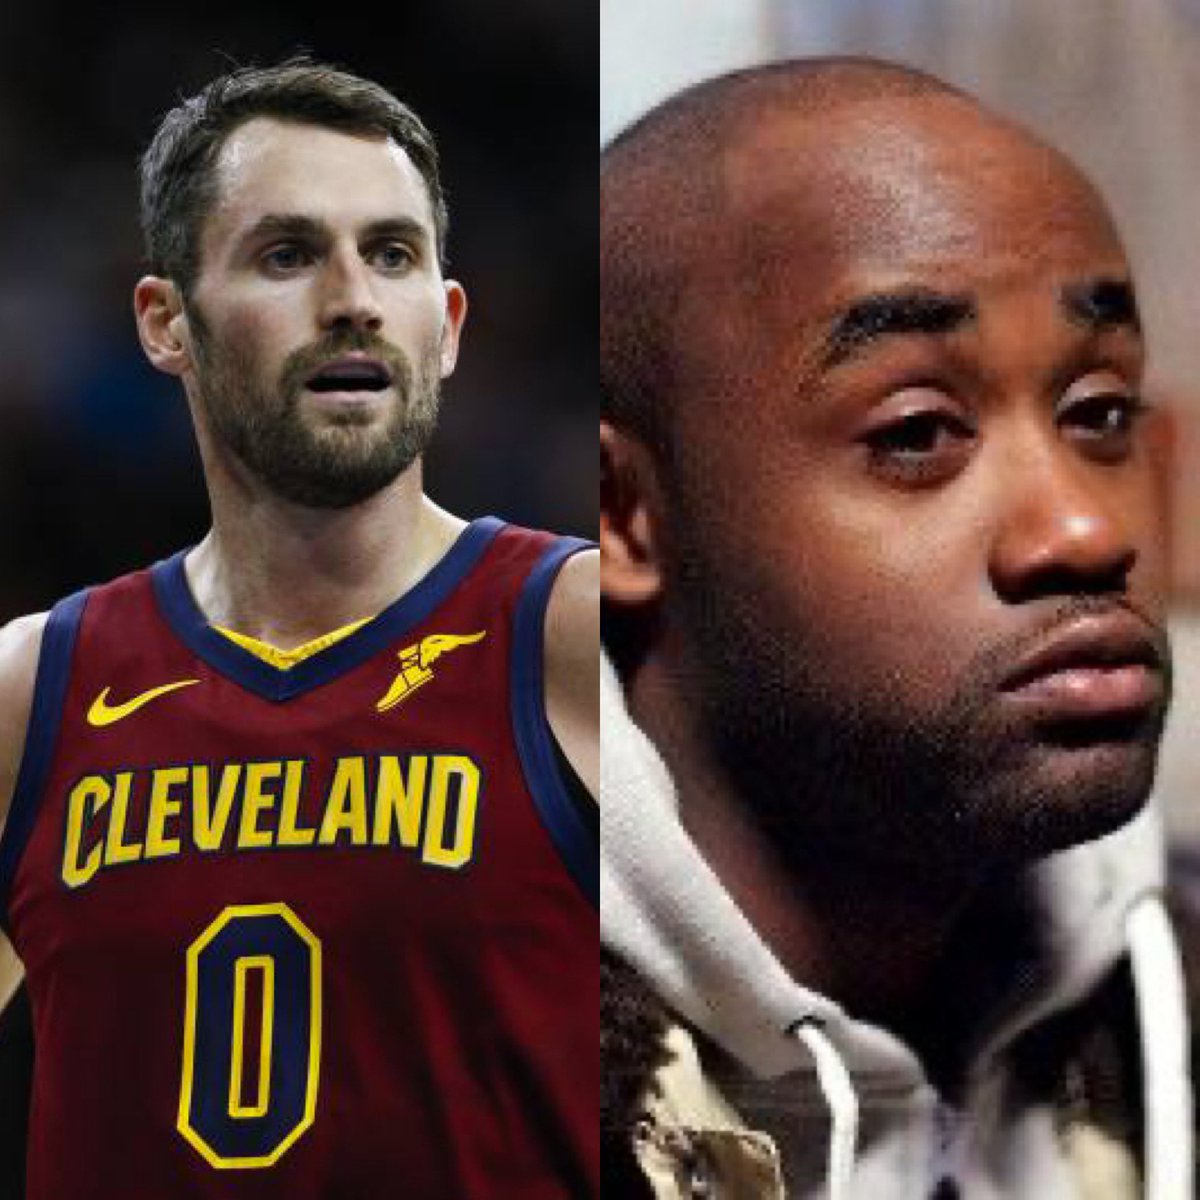 Kevin love Poot, got treated like a sucka by String but was a key player. Took out Wallace held it down in the towers and was the last one standing before he went to footlocker. Kevin love got treated like a weak link or liability but they couldn’t win without him.